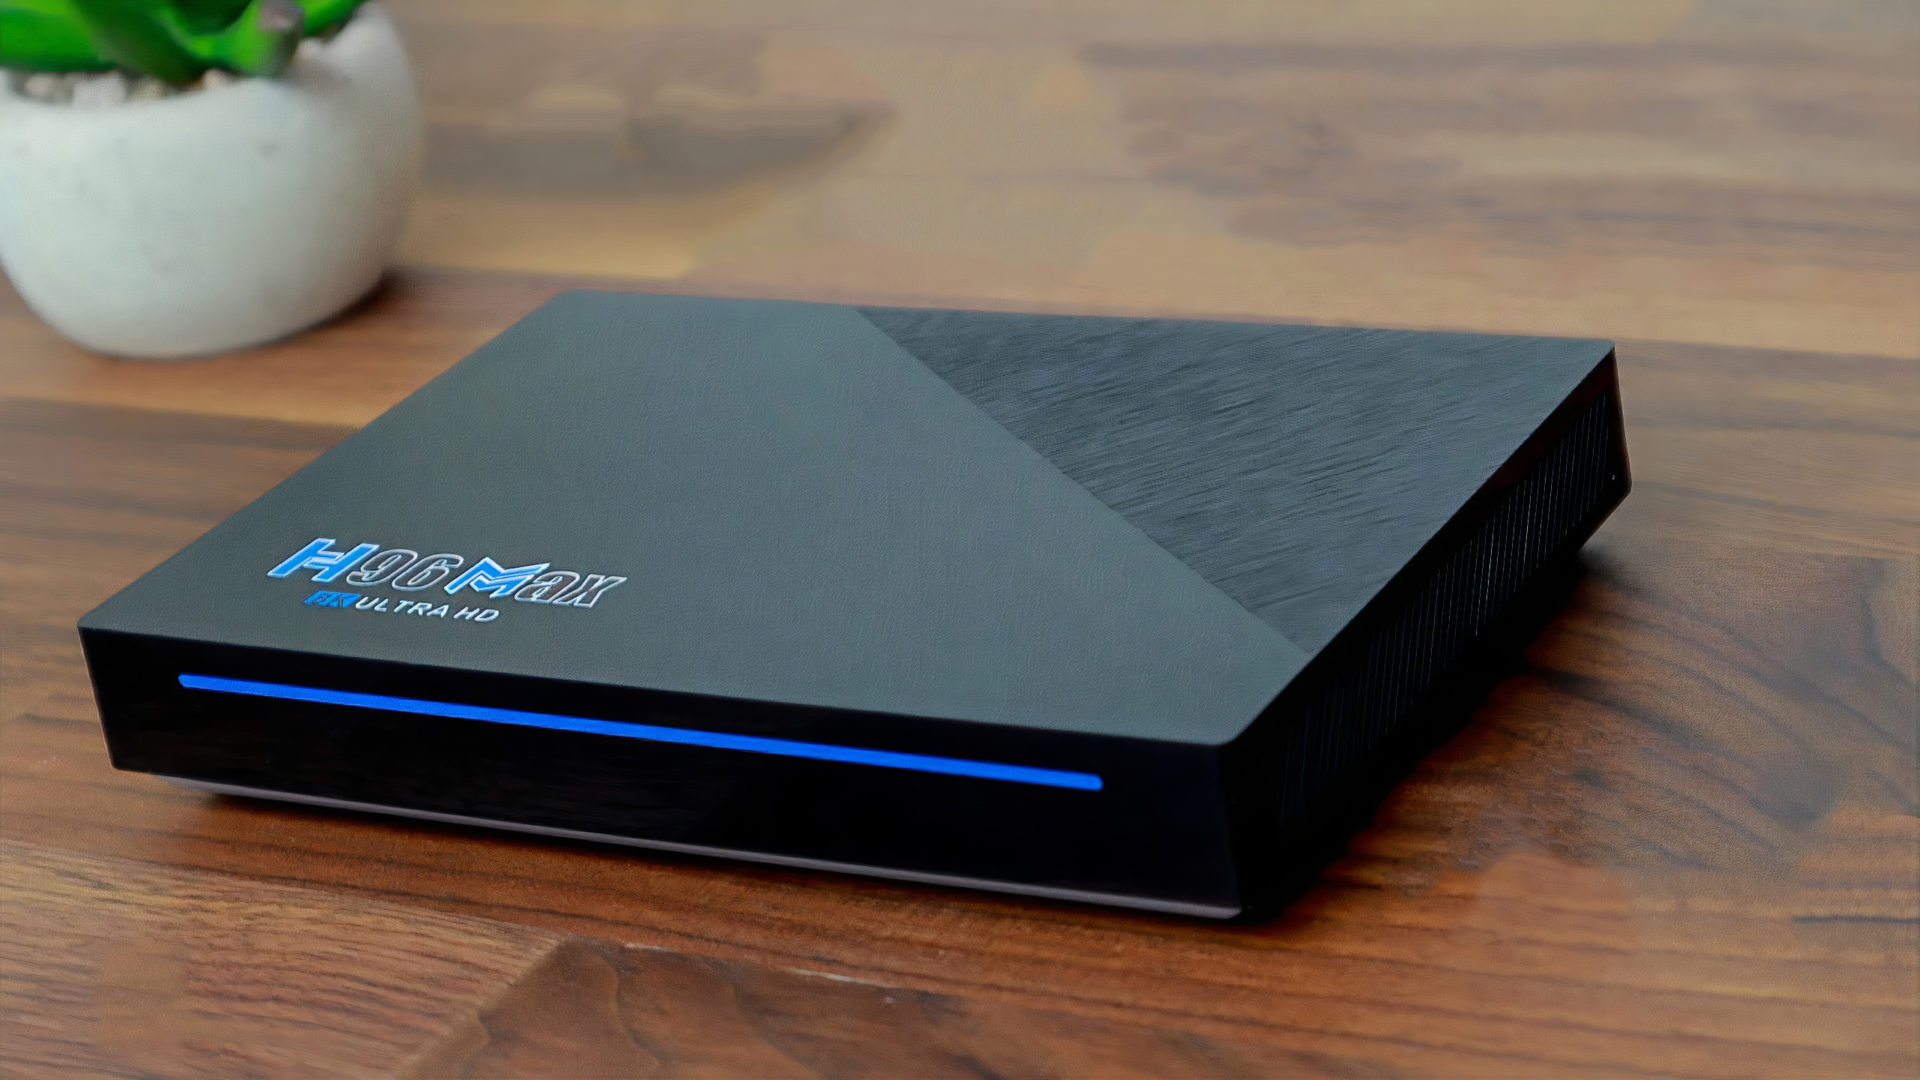 Upgrade Your TV: H96 MAX Android TV Box Review 